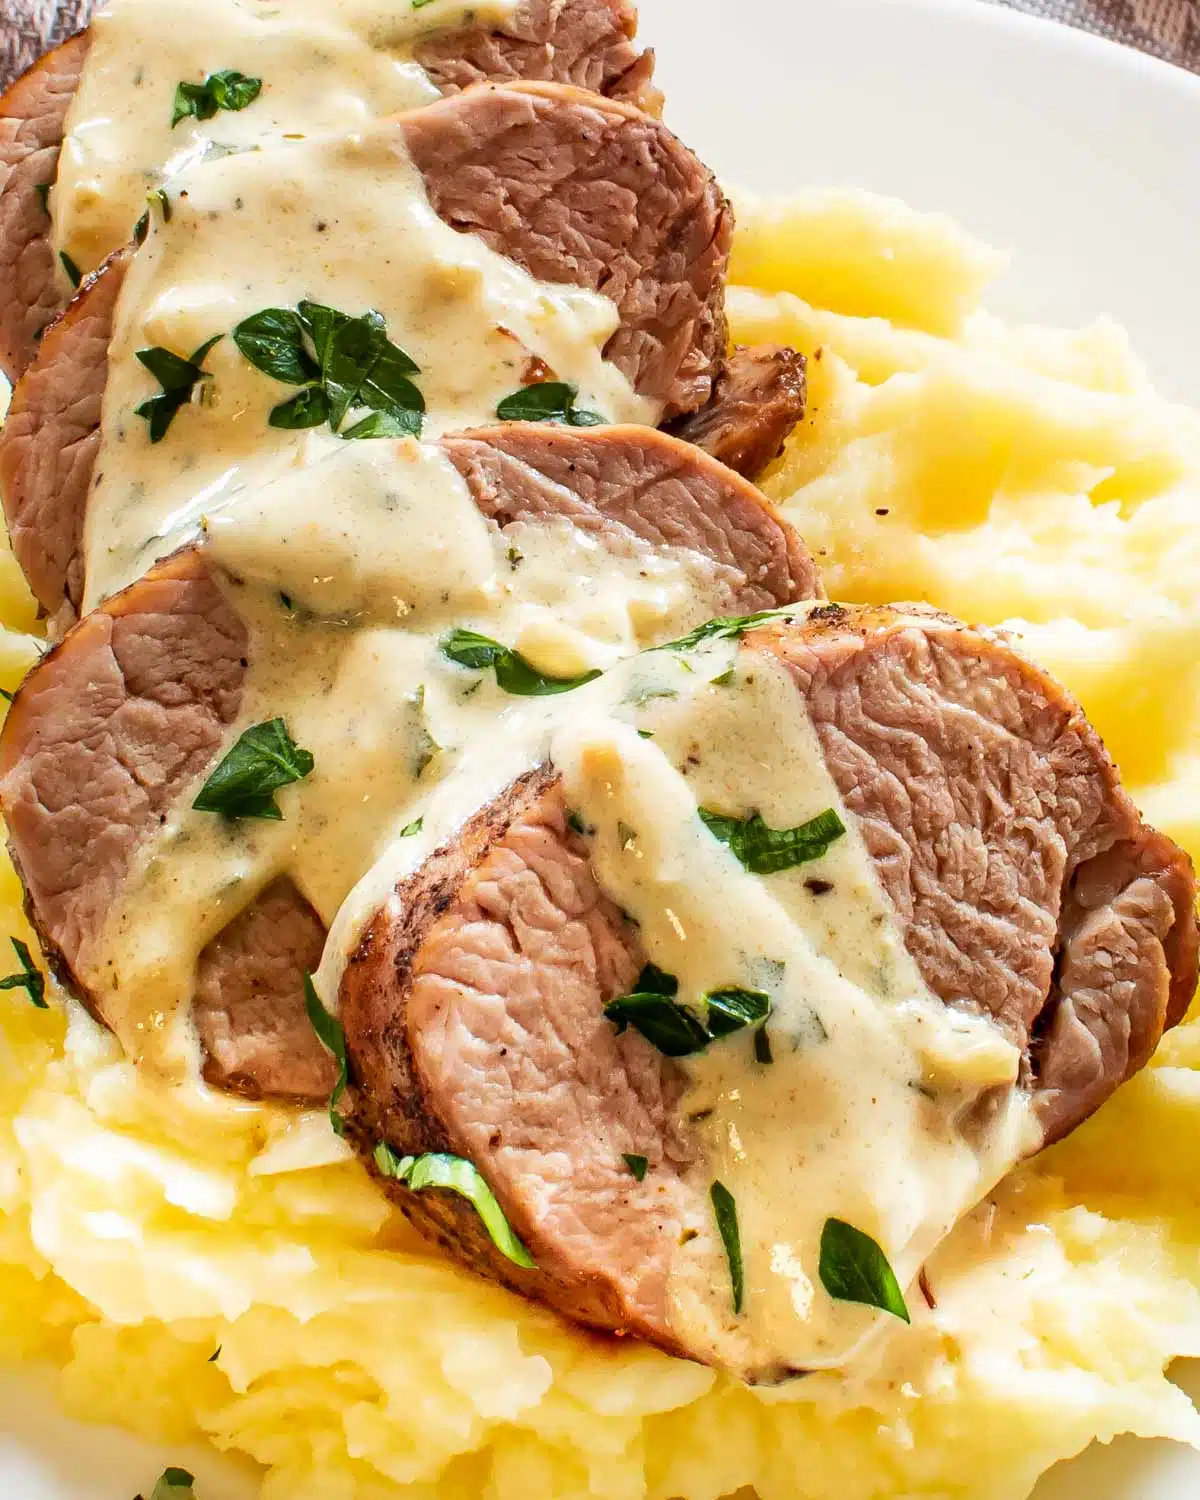 sliced up pork tenderloin with mustard sauce over a bed of mashed potatoes garnished with parsley.